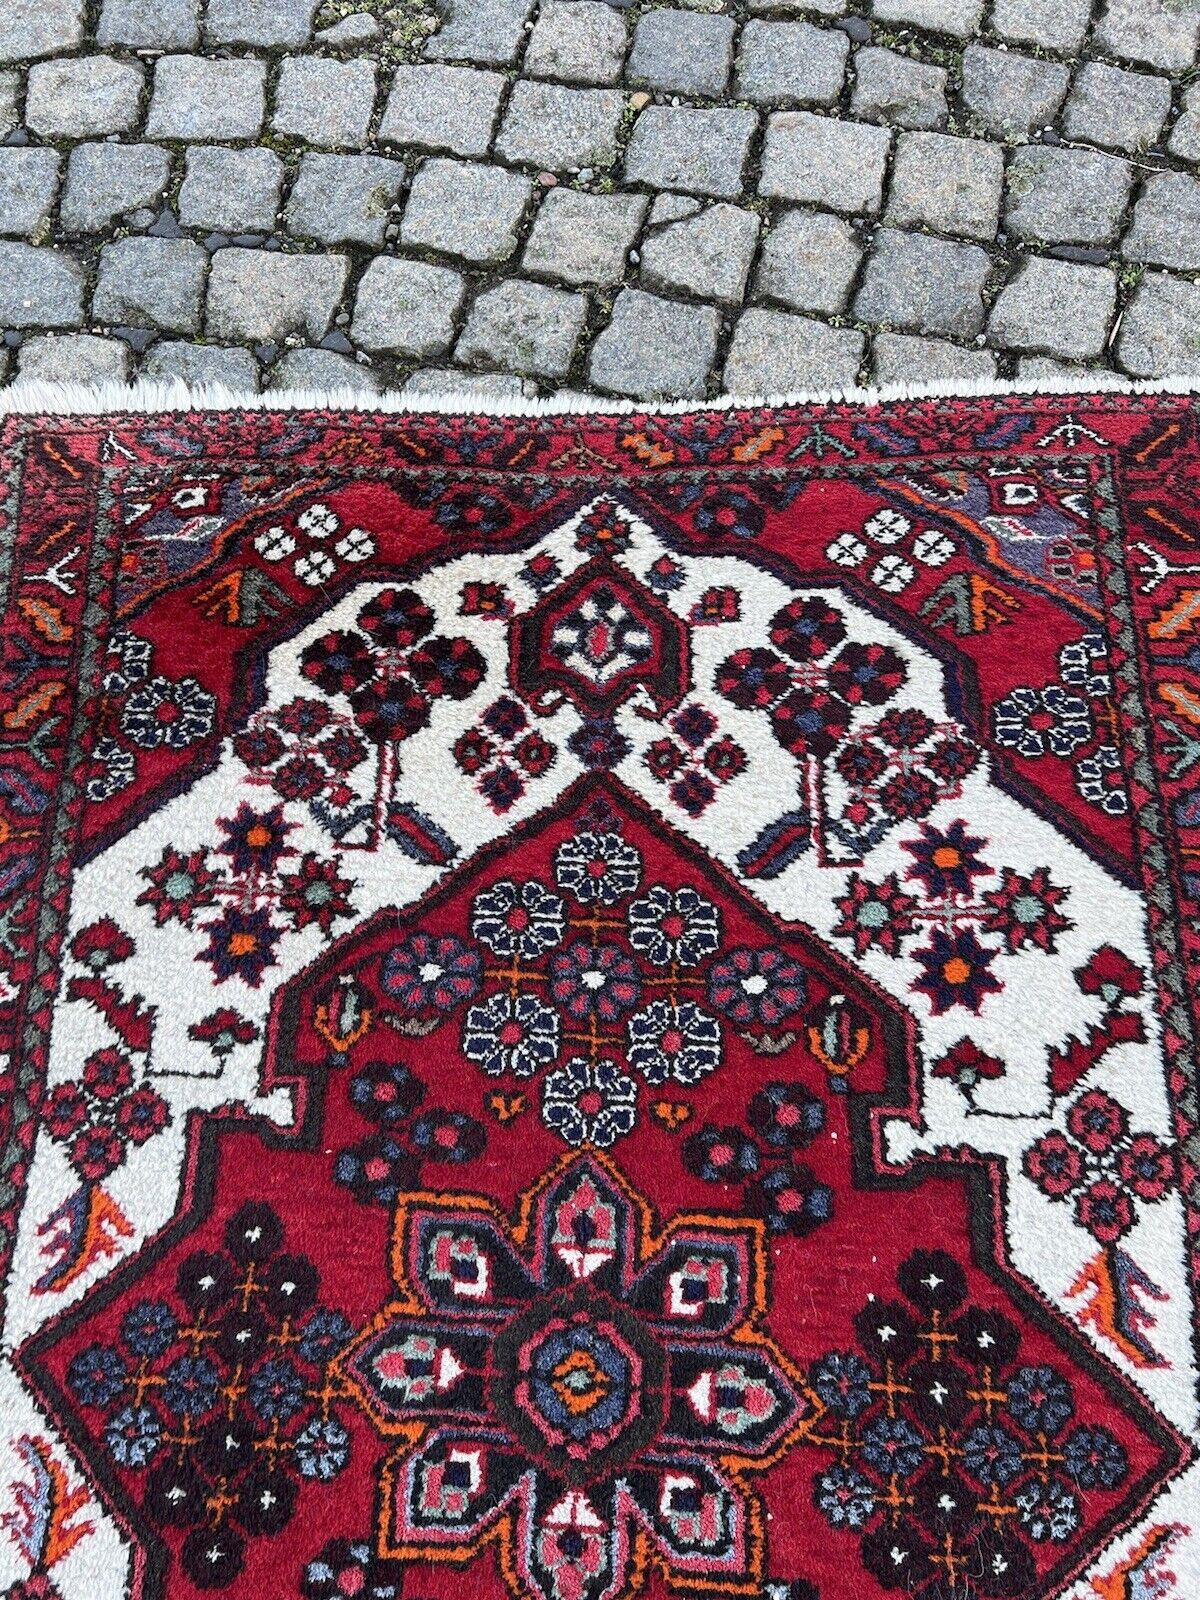 Handmade Vintage Persian Style Hamadan Rug 3.4' x 5.2', 1970s - 1S65 In Good Condition For Sale In Bordeaux, FR